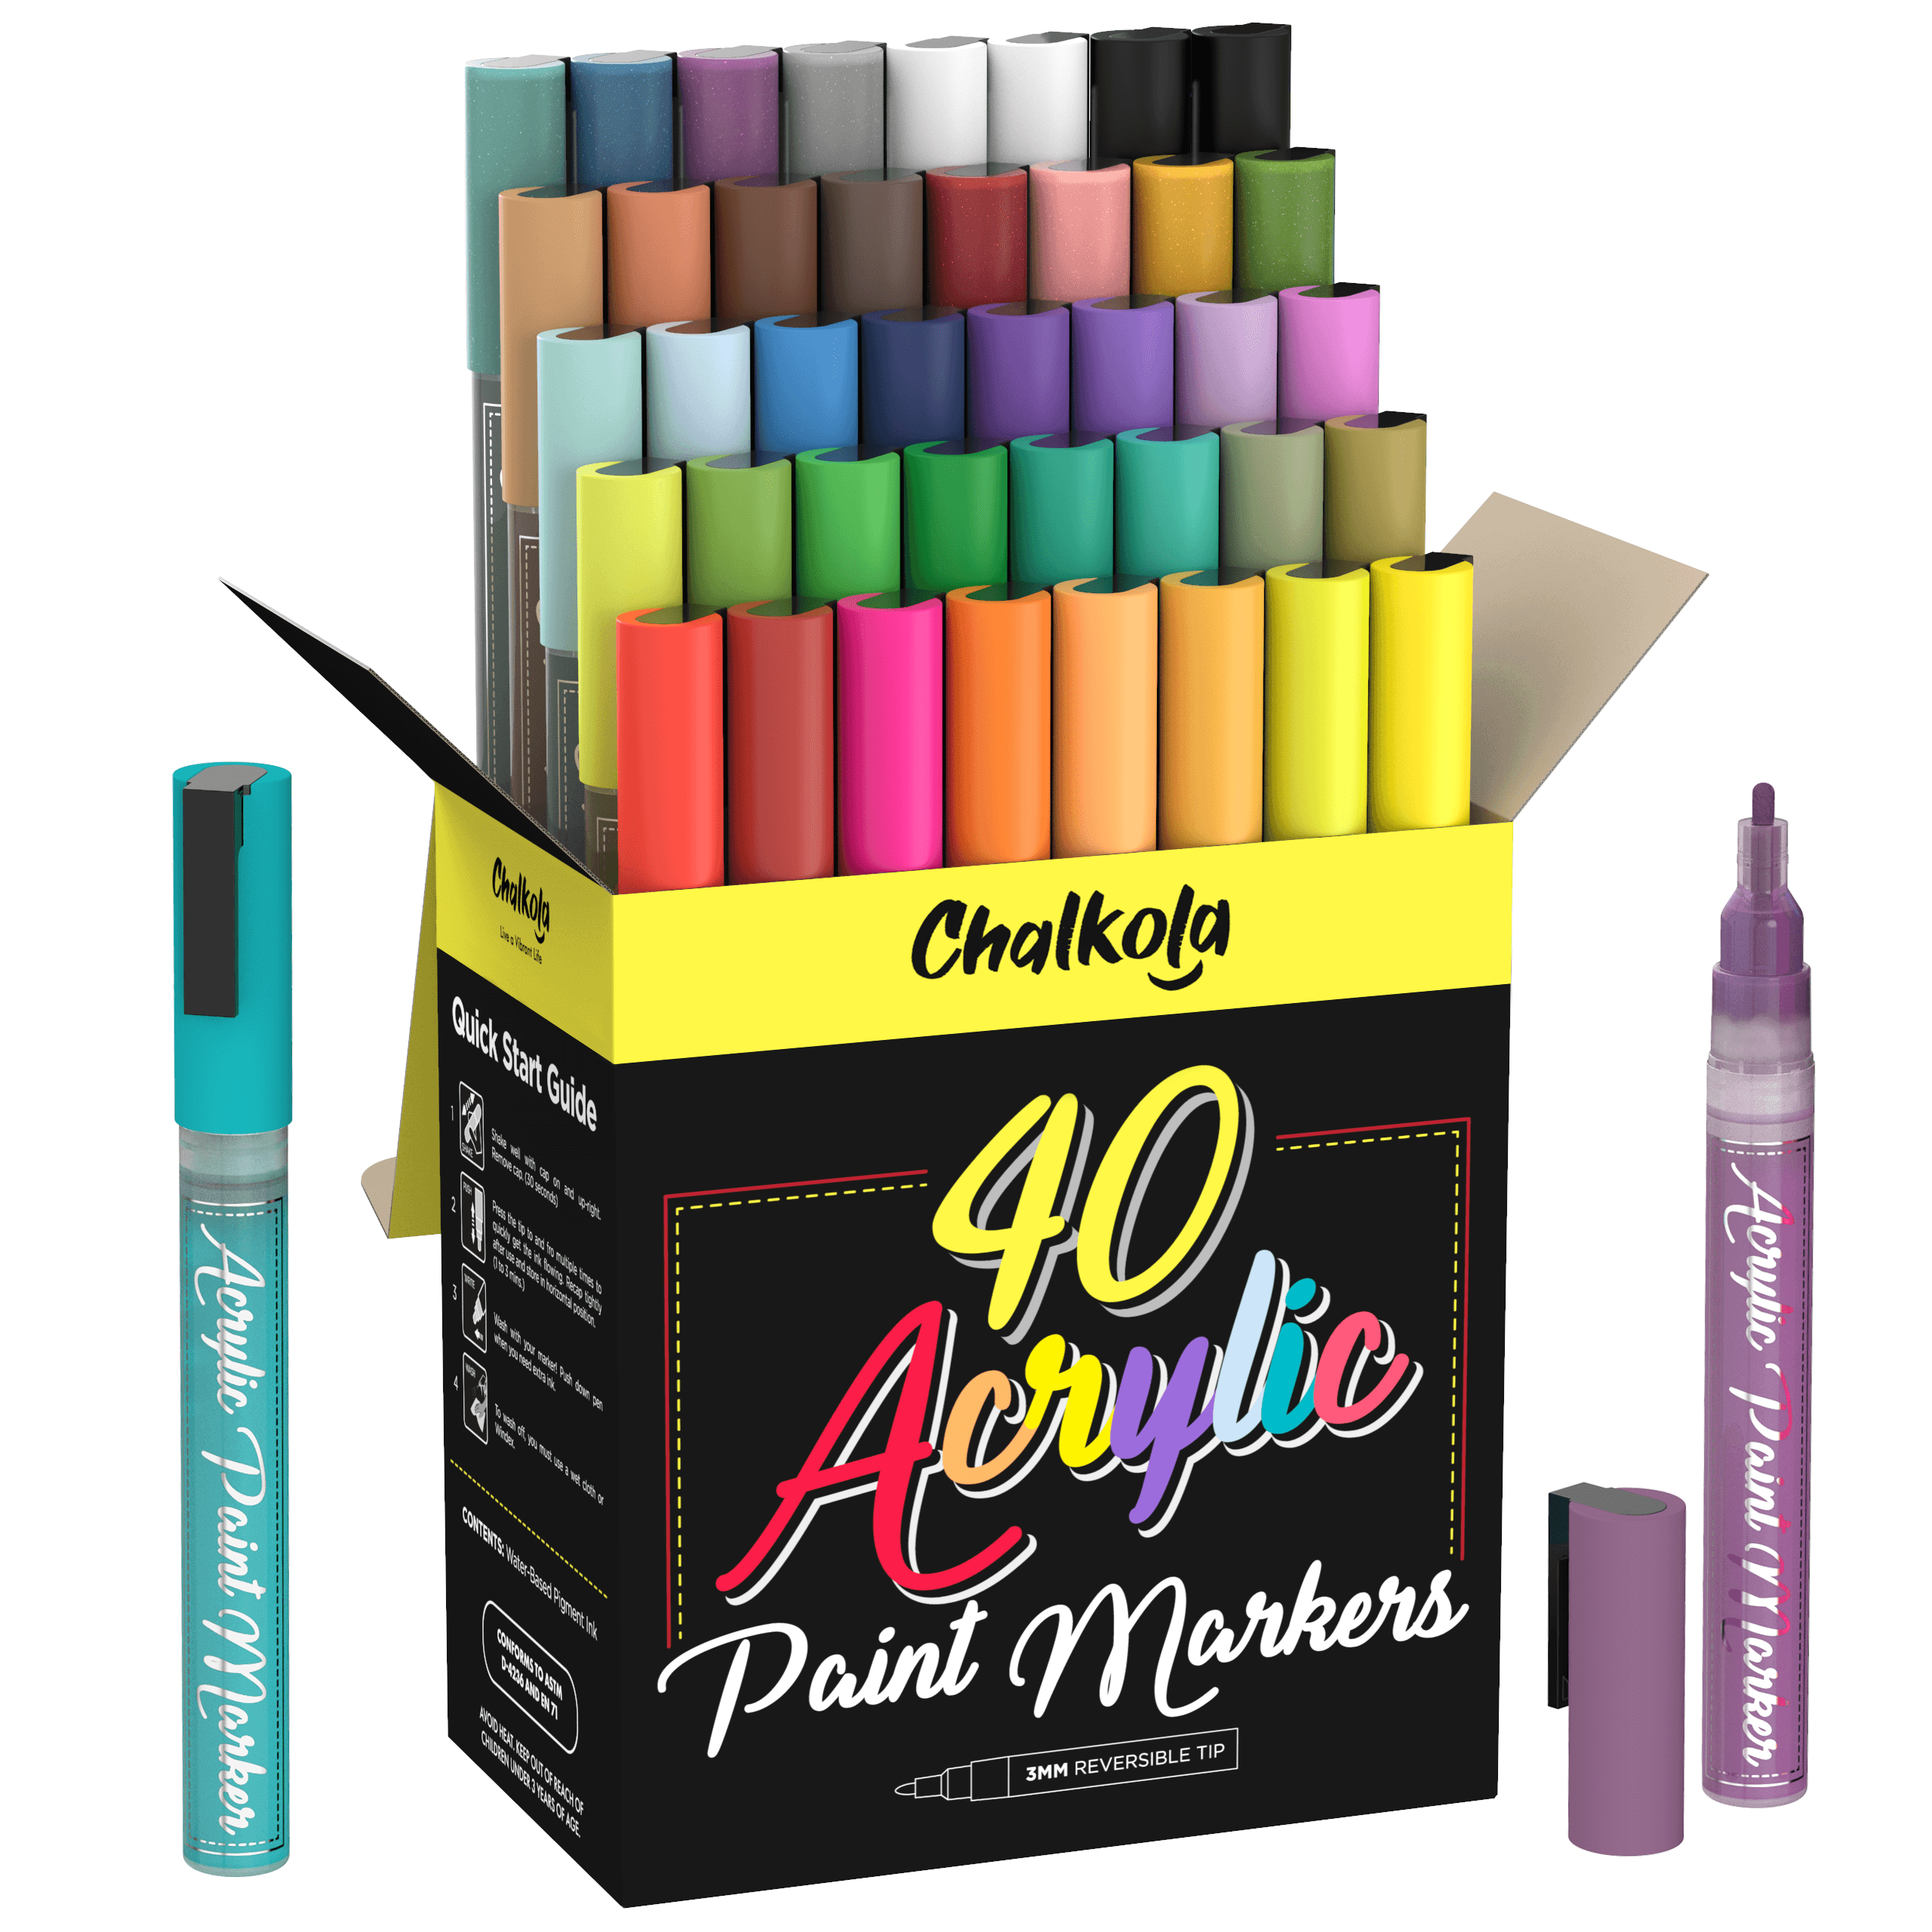 Chalkola 40 Acrylic Paint Pens Fine Tip for Rock Painting, Canvas, Ceramic, Glass, Fabric, Metal - Acrylic Paint Markers for Wood & Plastic - 40